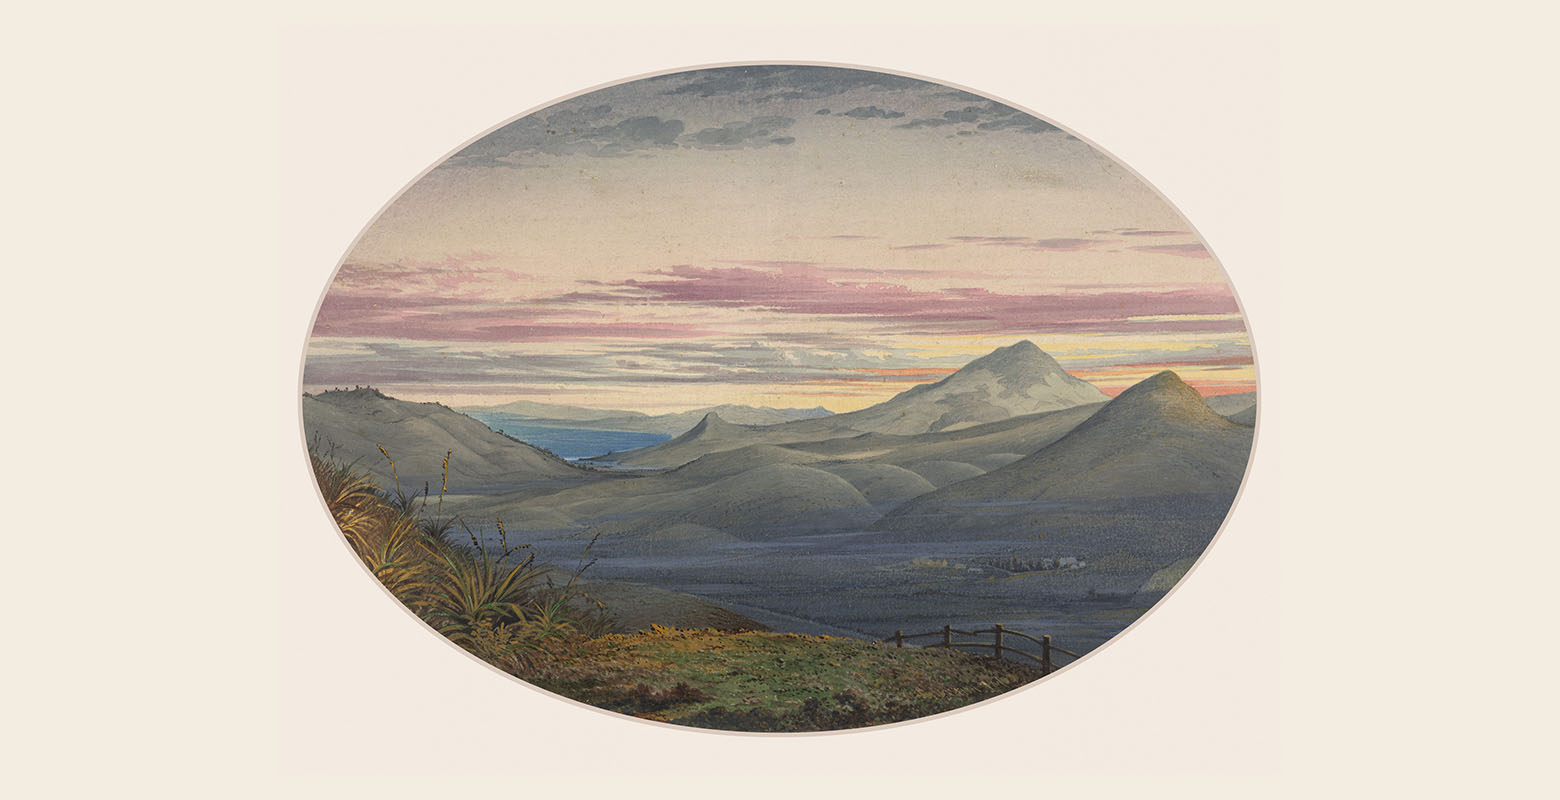 Vast view from high on a hill looking over an expansive plain with hills in the distance and a bay of water beyond. It is sunset and the sky is a blend of orange, purple, and white hues